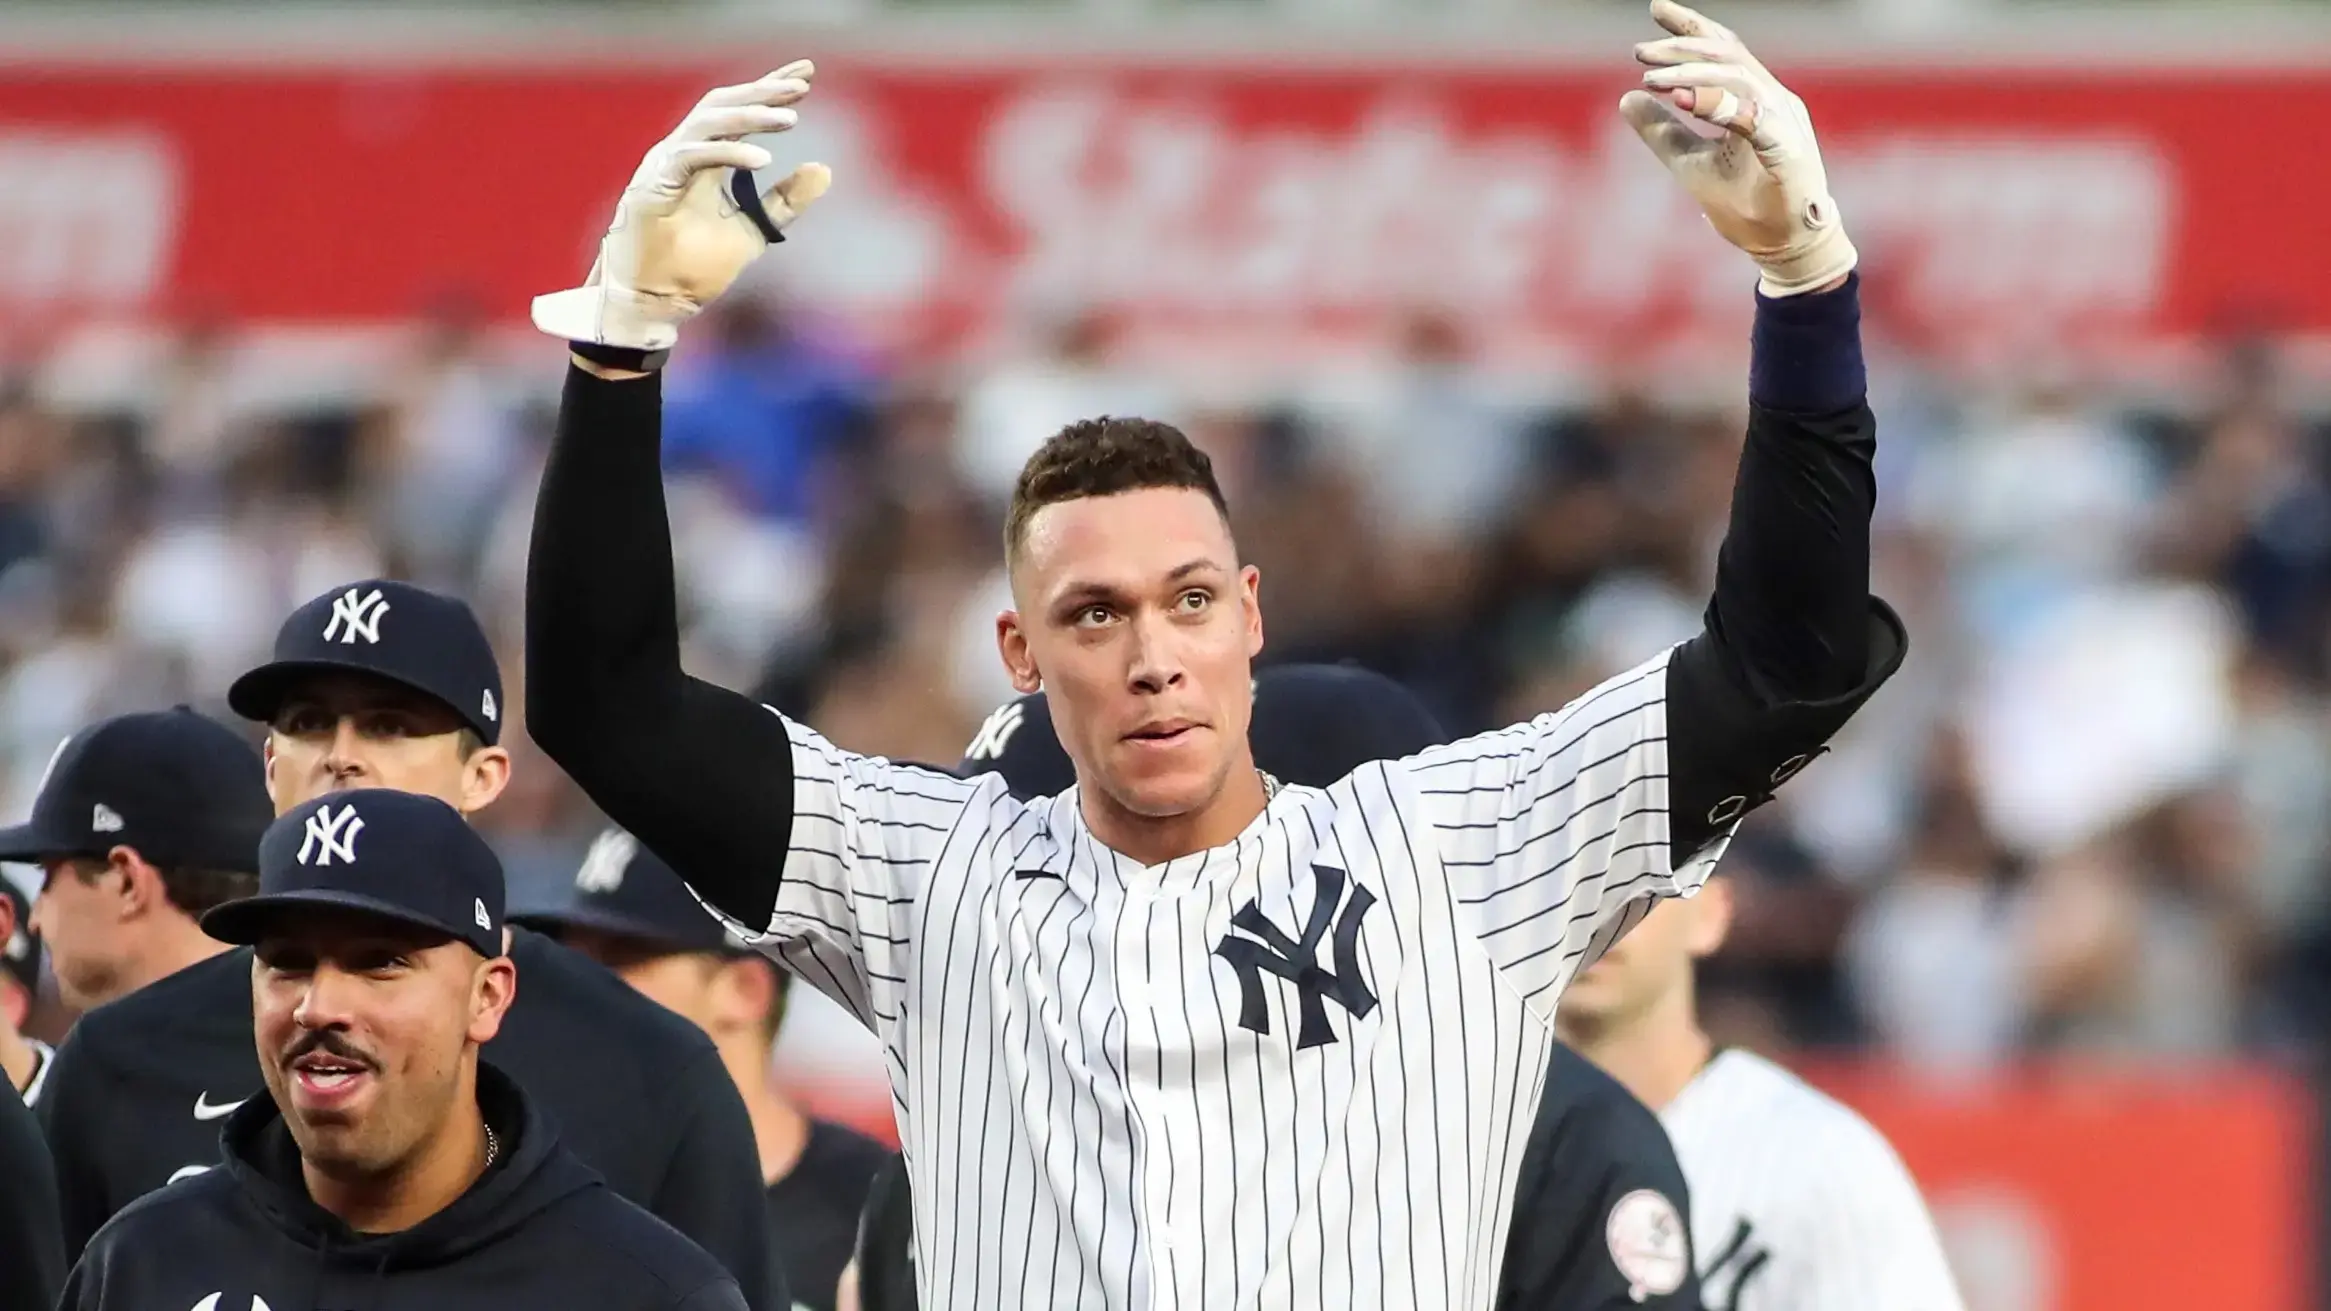 Oct 3, 2021; Bronx, New York, USA; New York Yankees right fielder Aaron Judge (99) waves to the crowd after his game winning RBI single to defeat the Tampa Bay Rays 1-0 and clinch a wildcard playoff spot at Yankee Stadium. Mandatory Credit: Wendell Cruz-USA TODAY Sports / Wendell Cruz-USA TODAY Sports